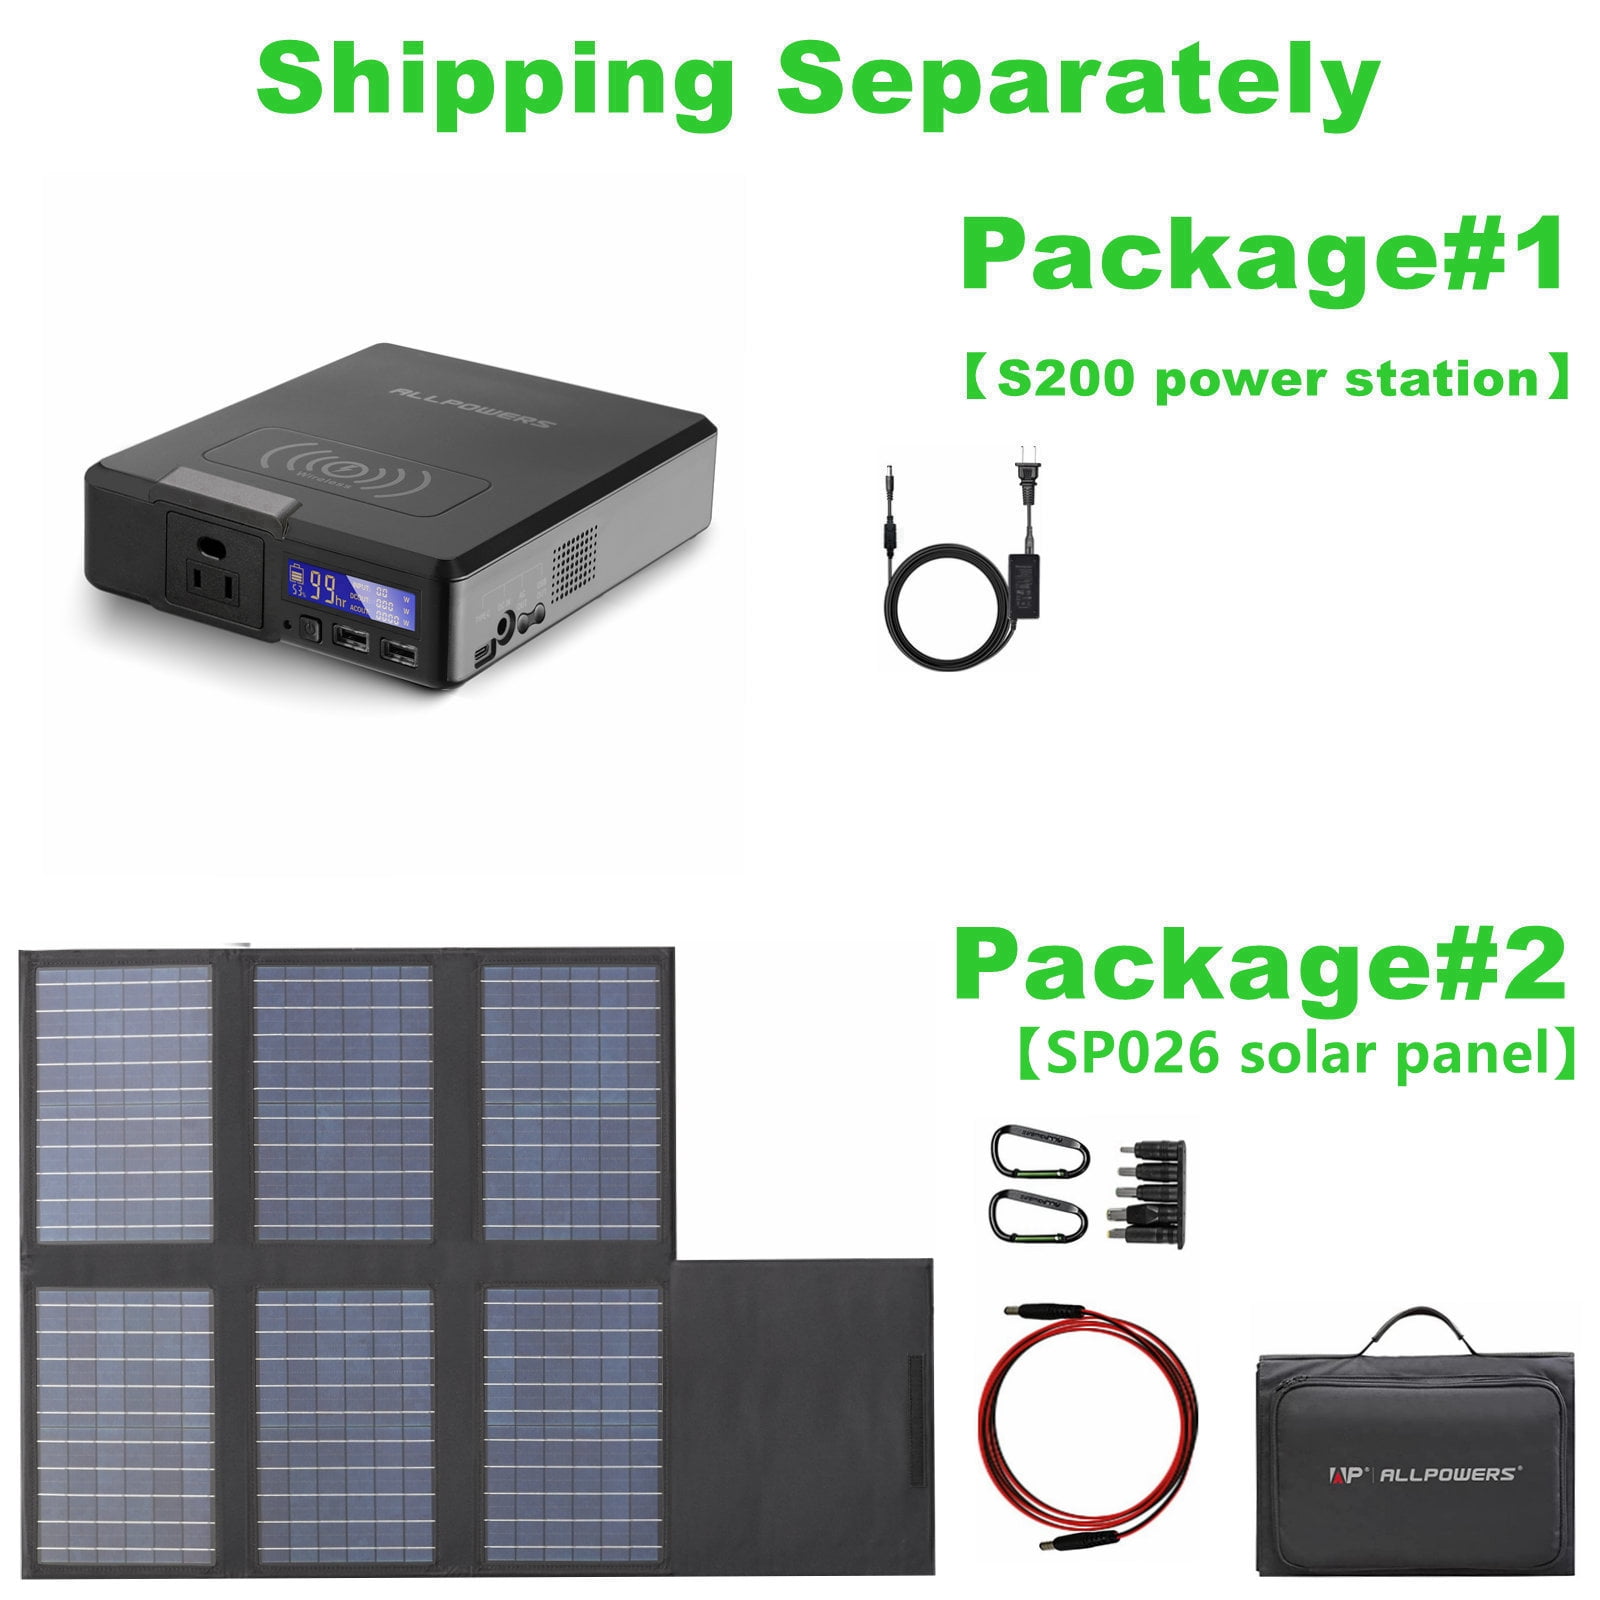 ALLPOWERS S200 Solar Generator Kit, 200W 154Wh Portable Power Station with  SP026 60W Foldable Solar Panel, Portable Generator Charger for Camping, 